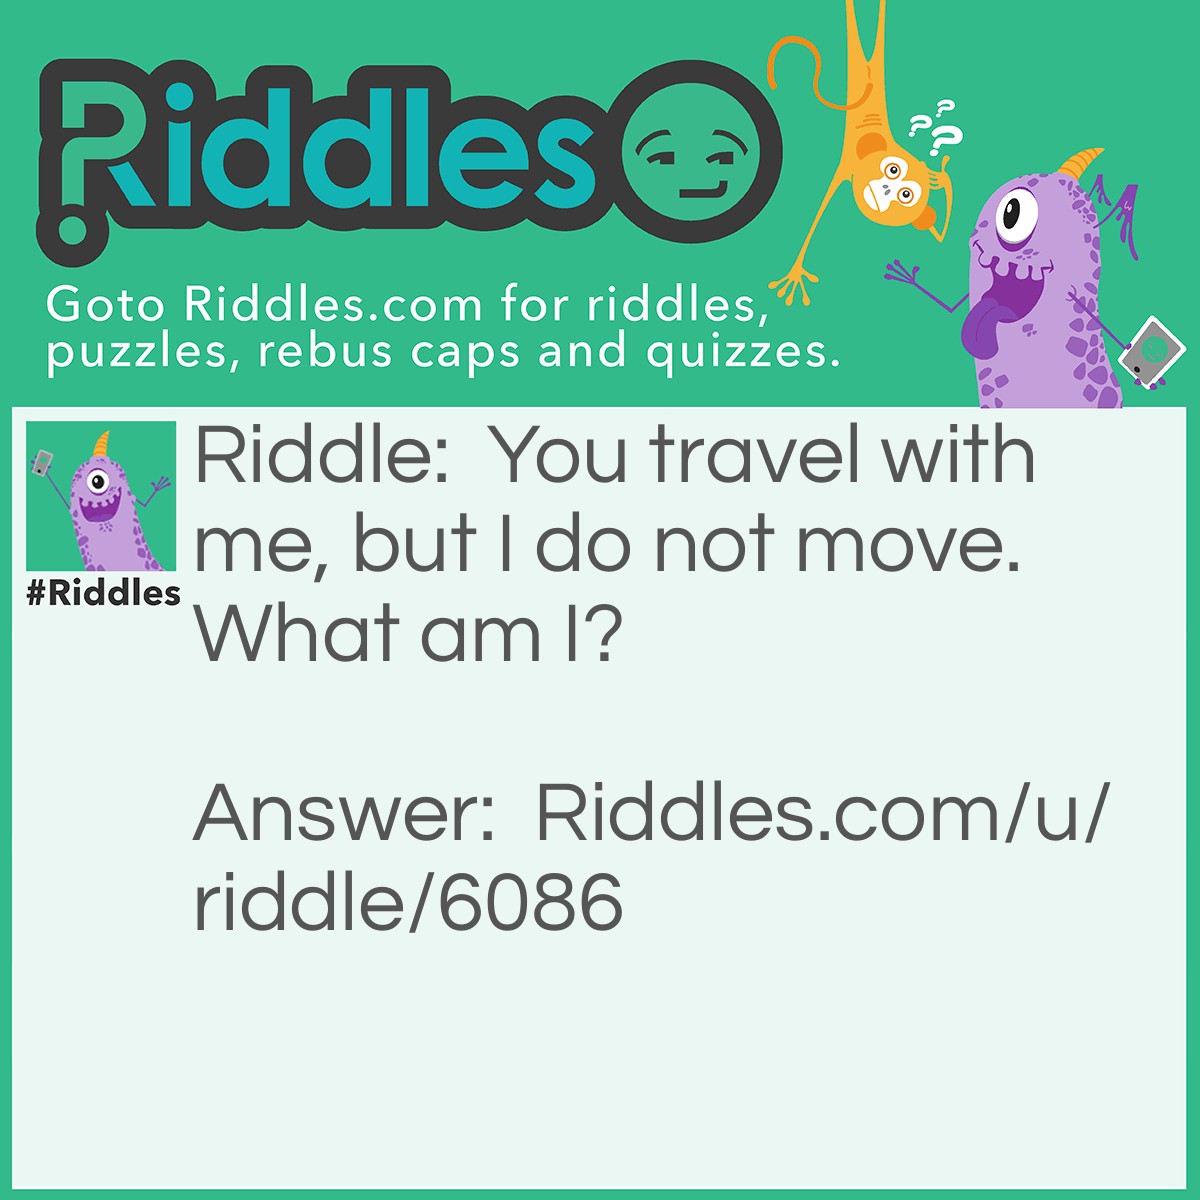 Riddle: You travel with me, but I do not move. What am I? Answer: Stairs!